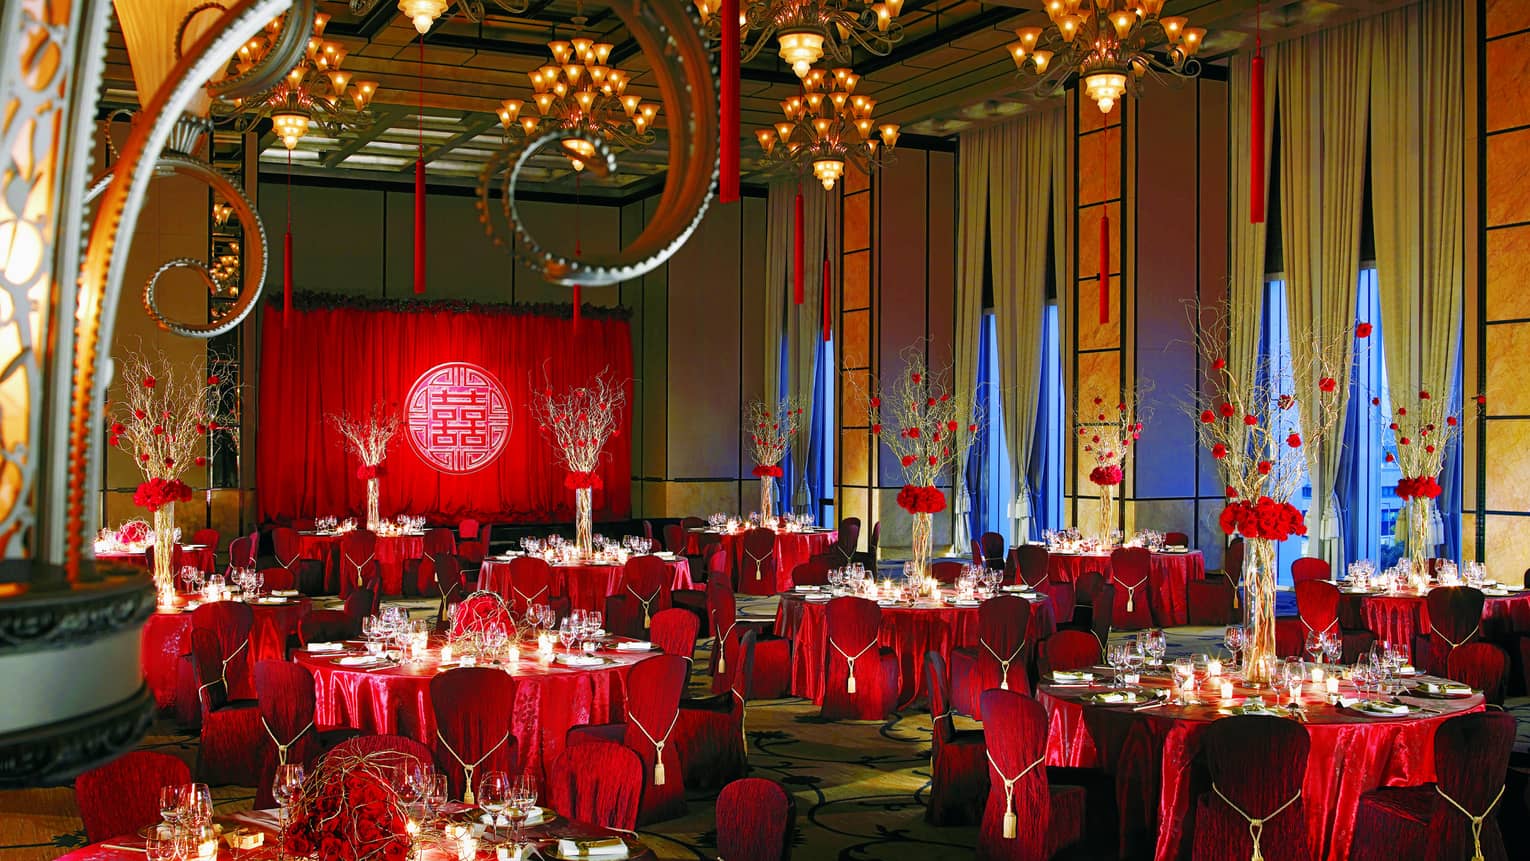 Elegant wedding banquet hall with red table linens and flower centrepieces, high ceilings, chandeliers